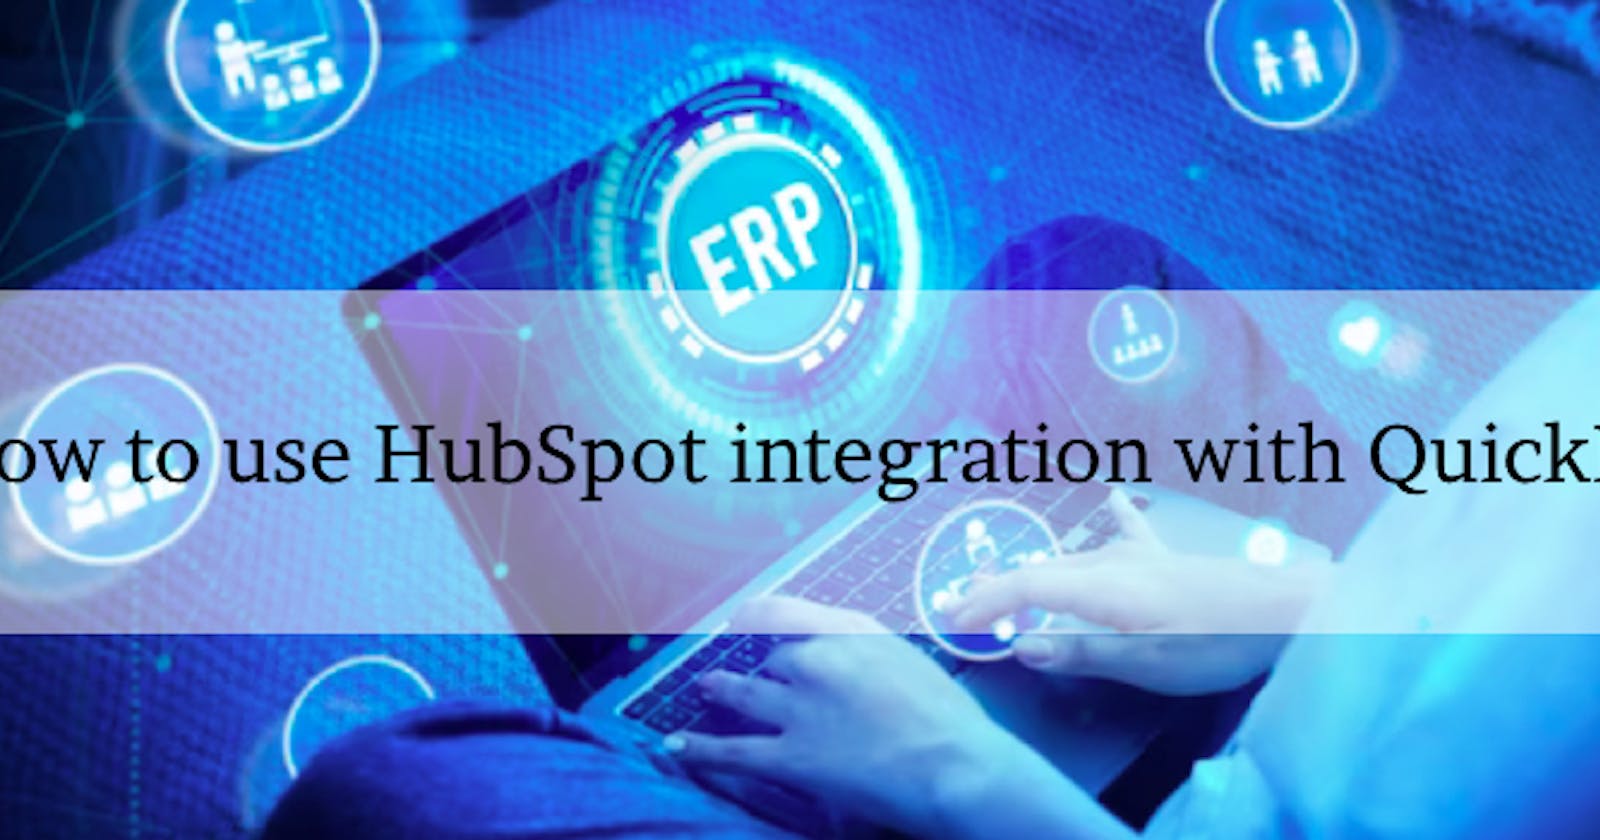 How to use HubSpot integration with QuickBooks